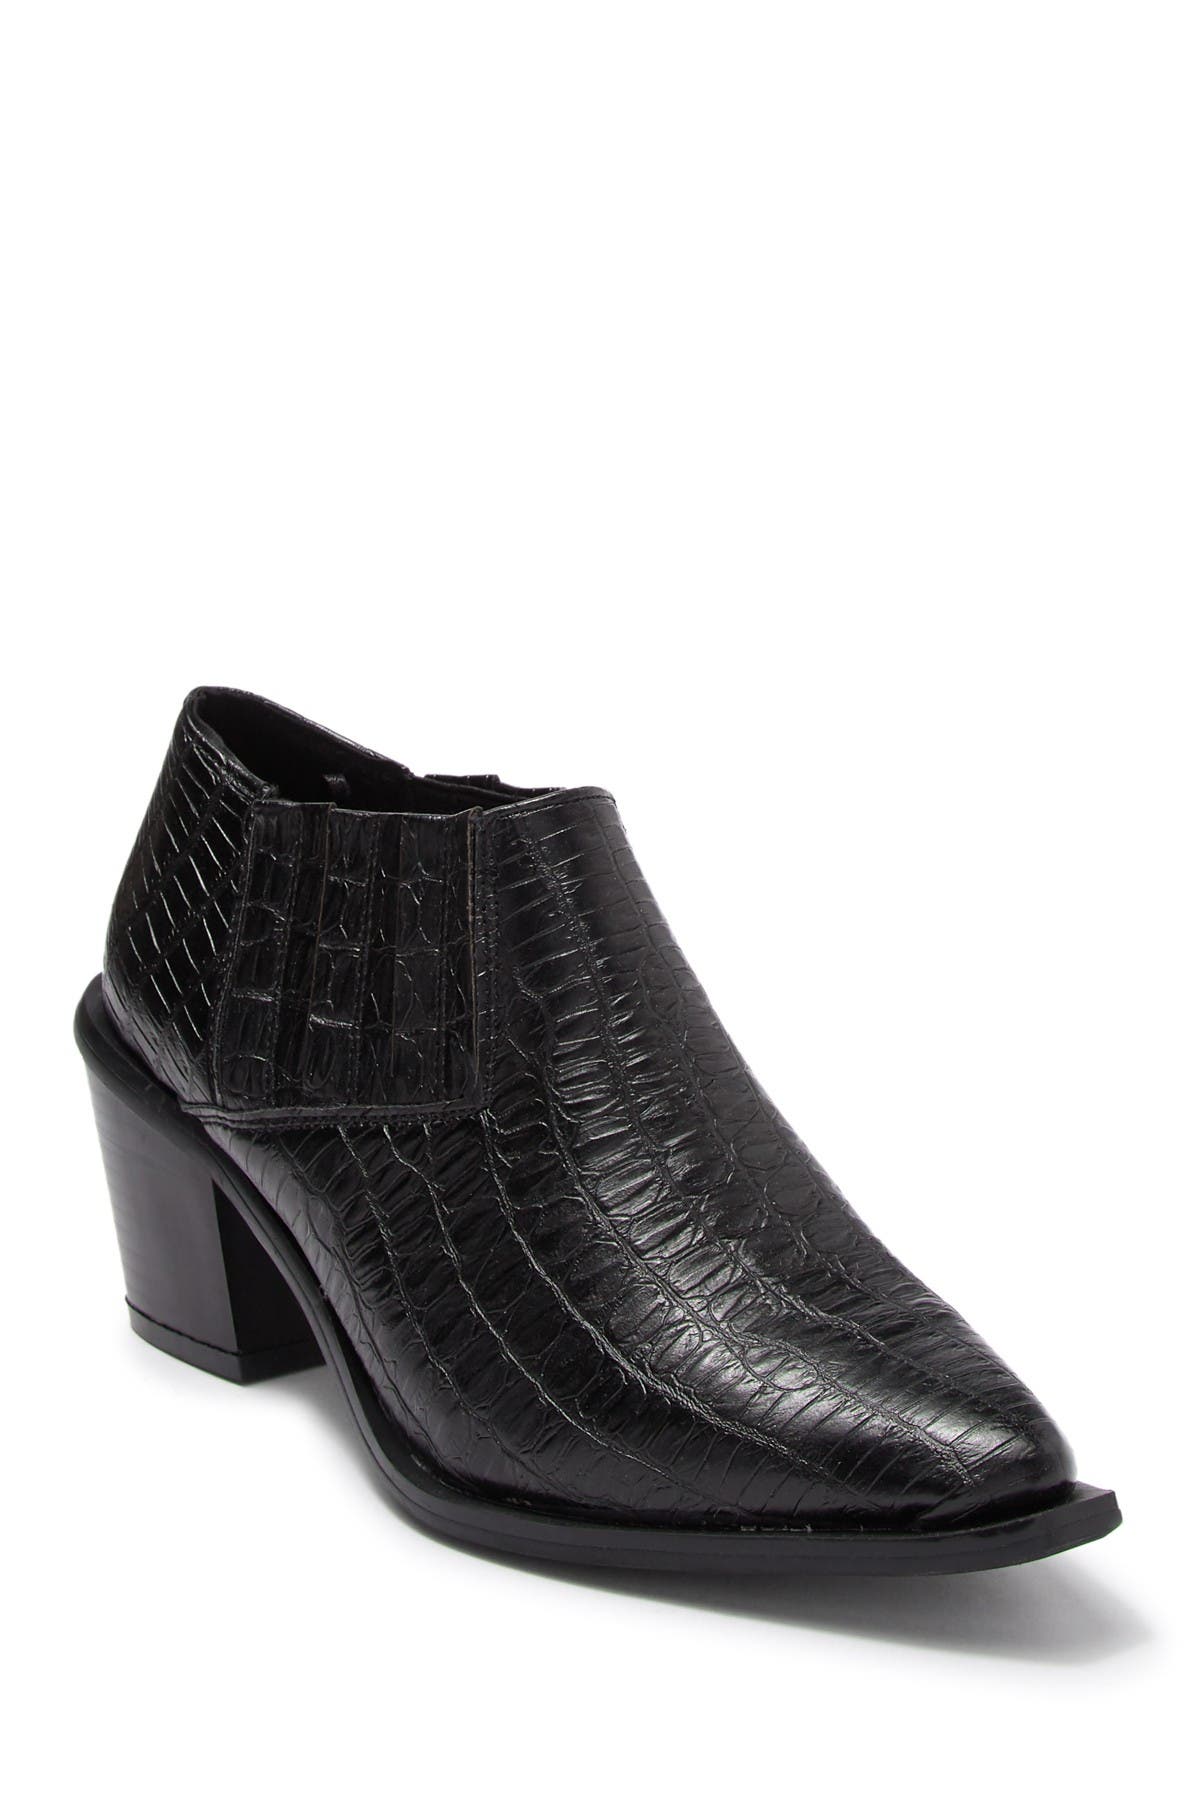 seven7 ankle boots